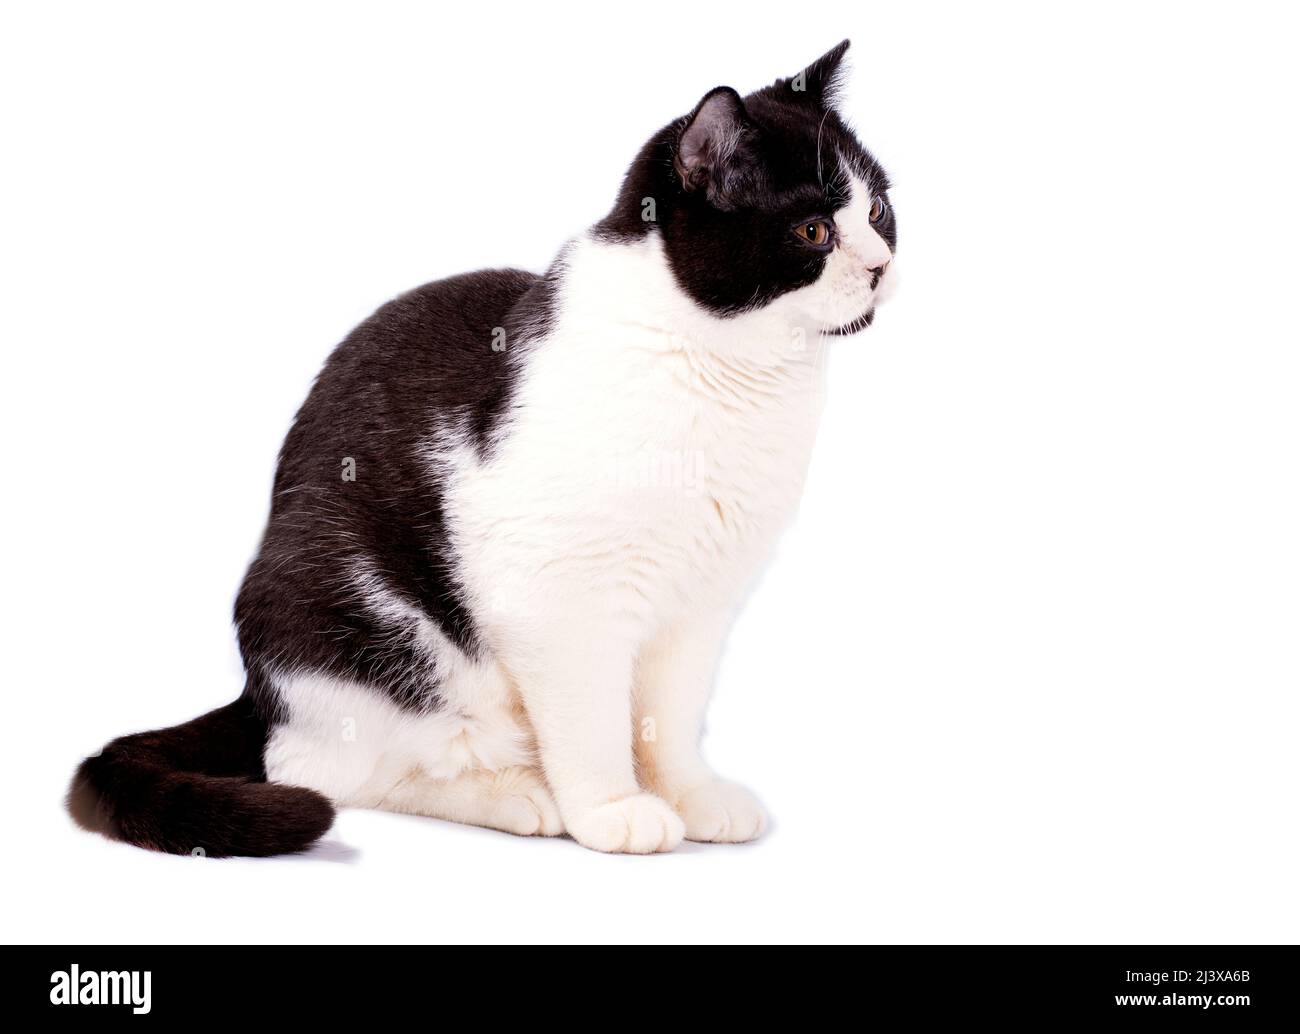 big Scottish cat bicolor color on a white background, isolated image, beautiful domestic cats, pets, Stock Photo